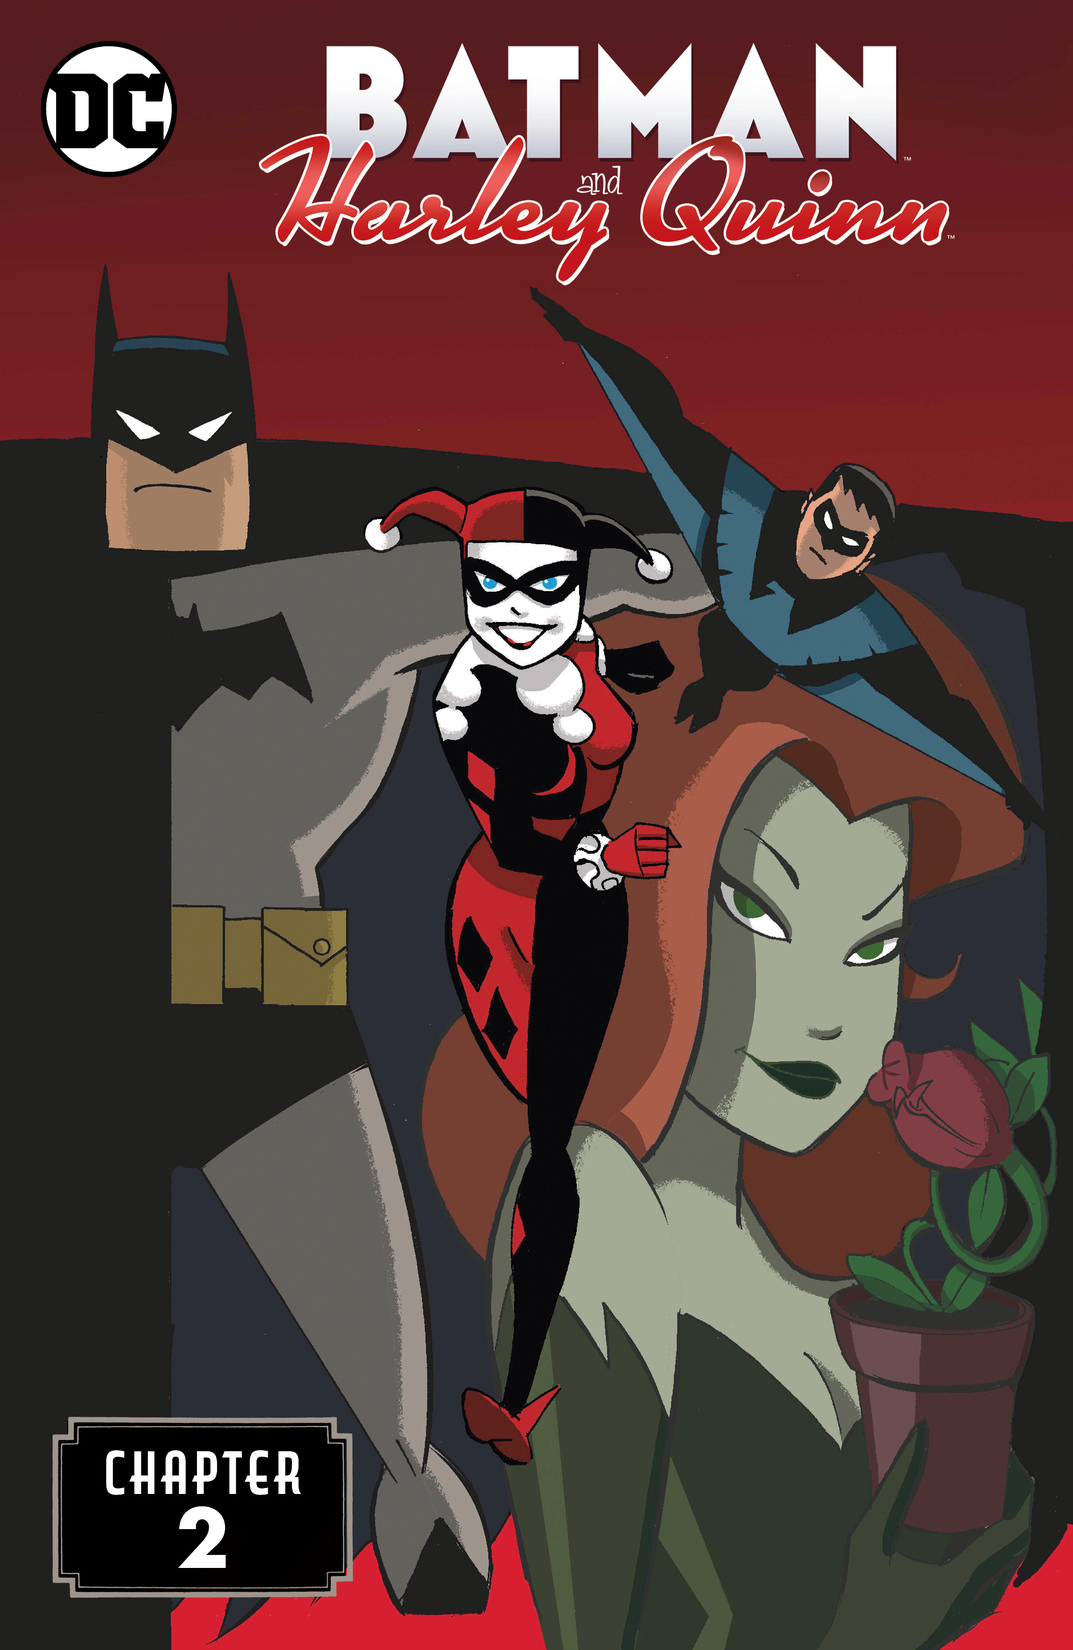 Batman and Harley Quinn #2 preview images